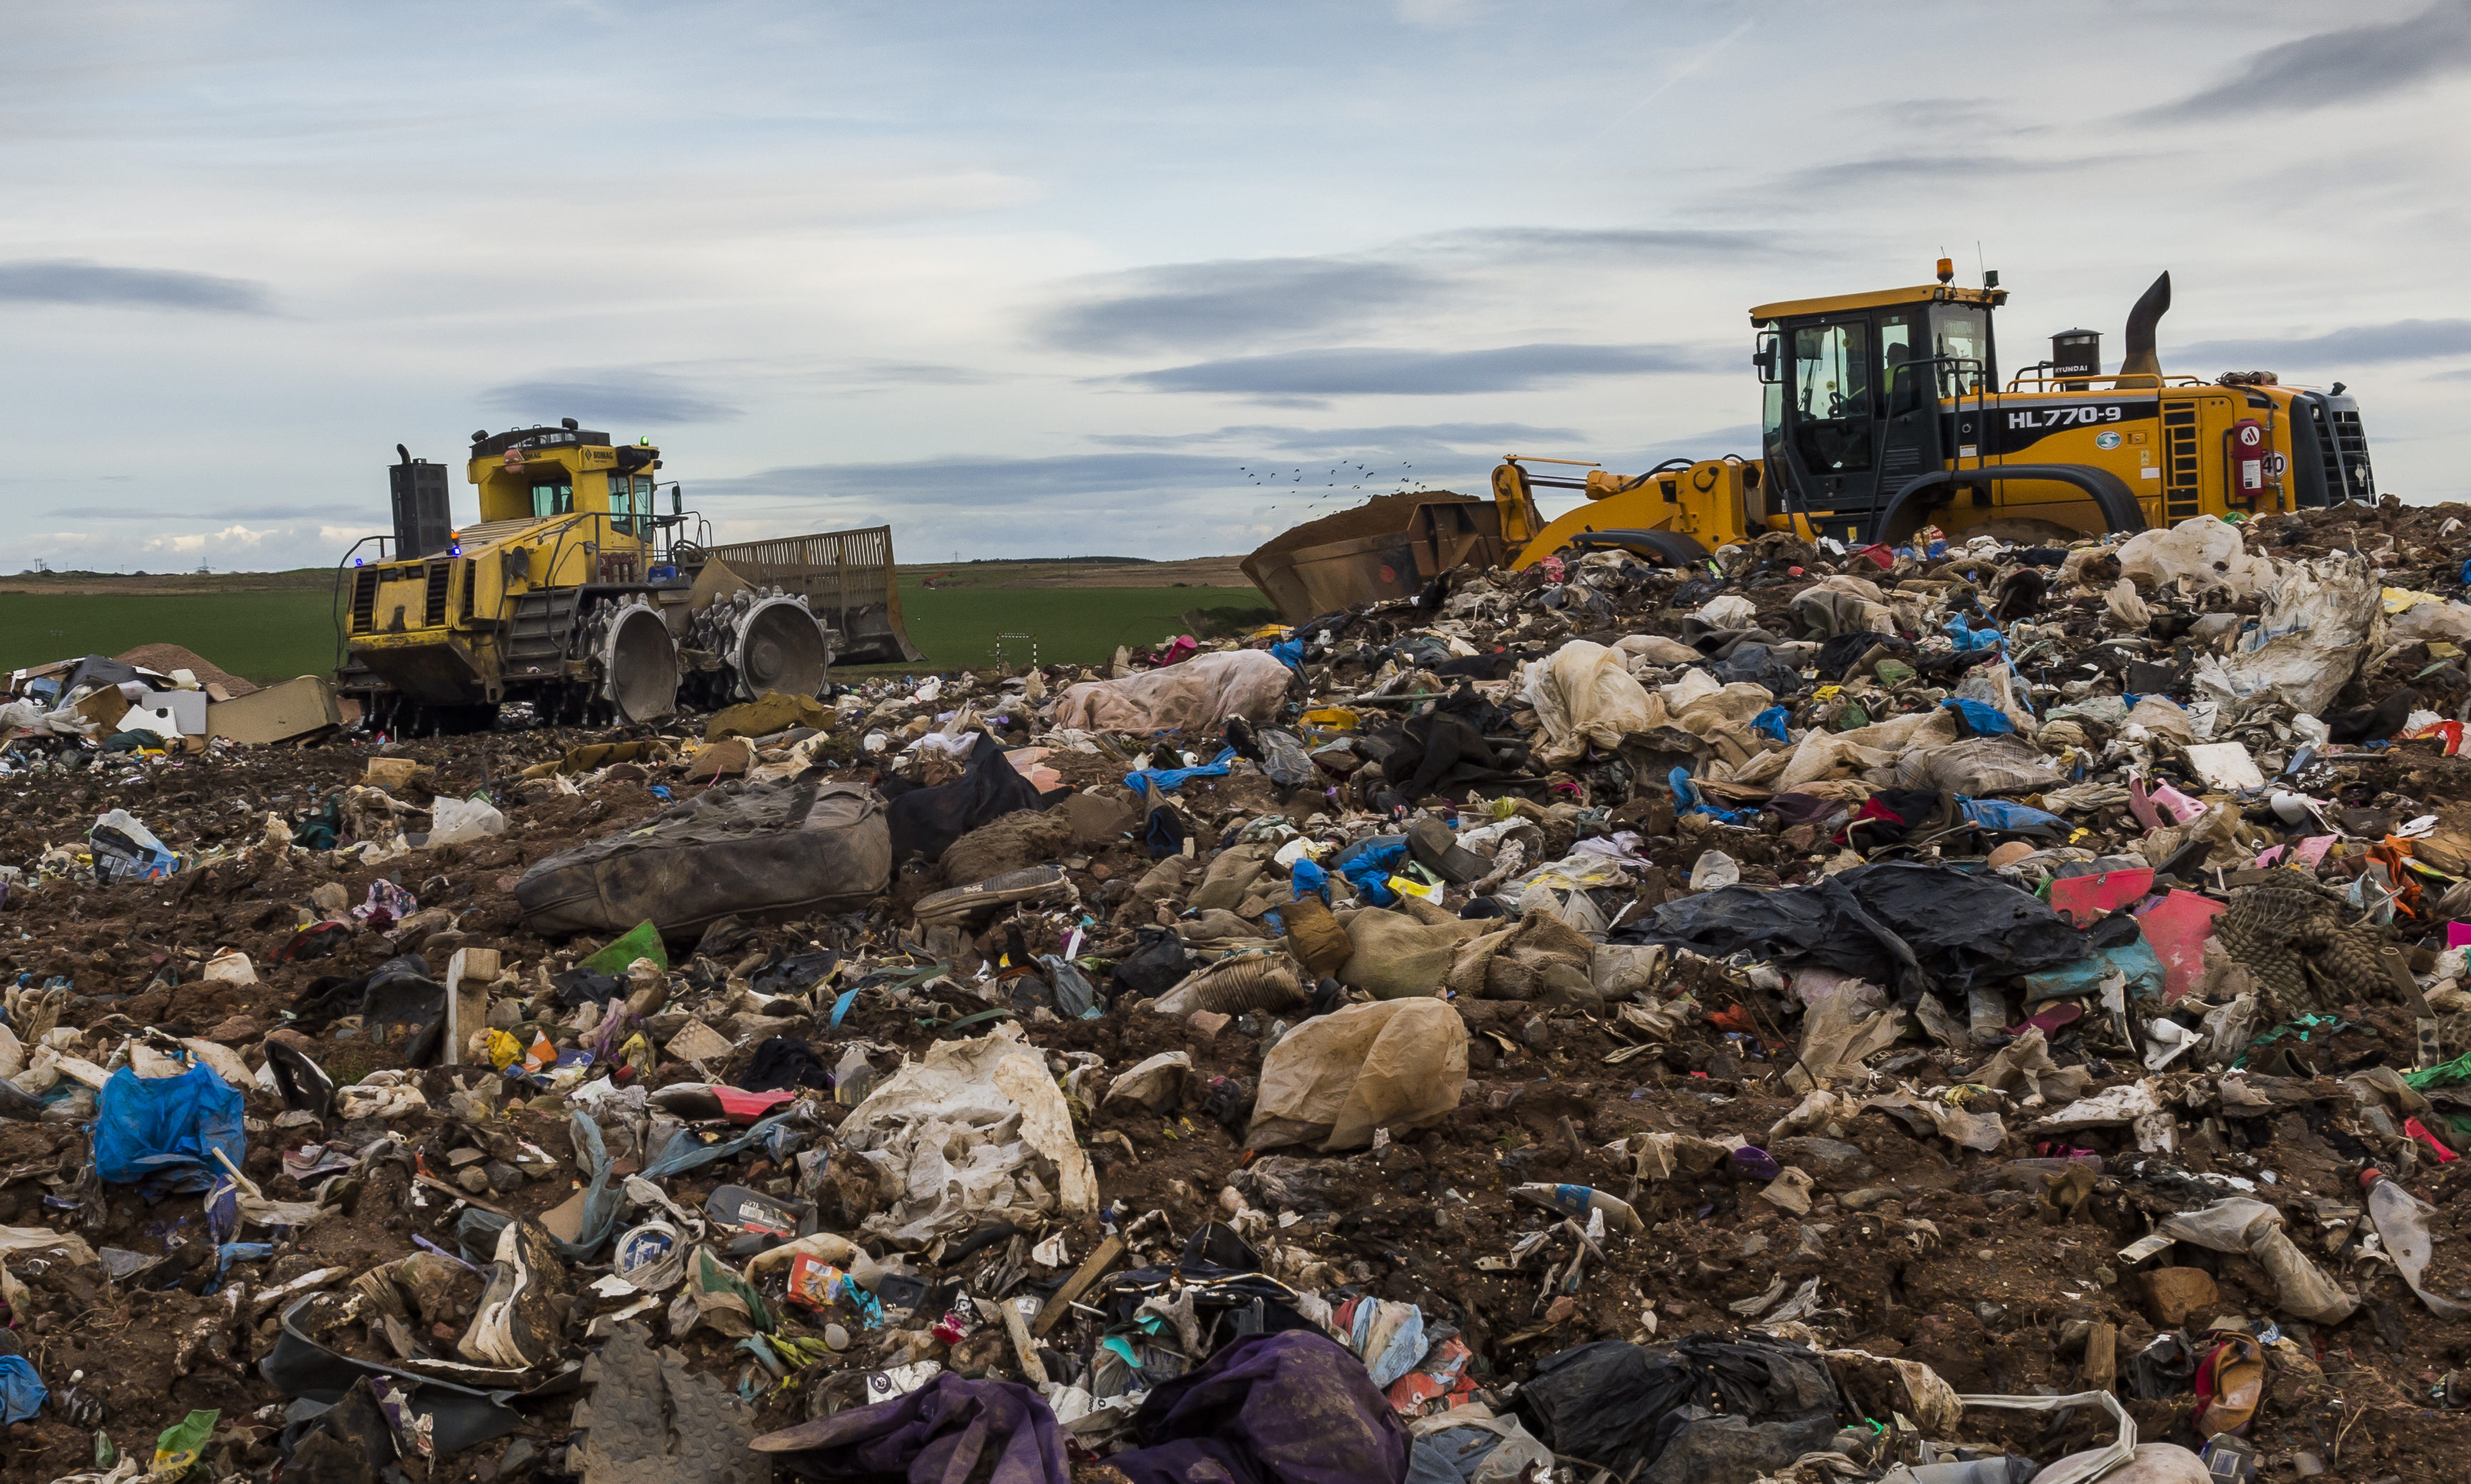 The new facility will divert waste from landfill